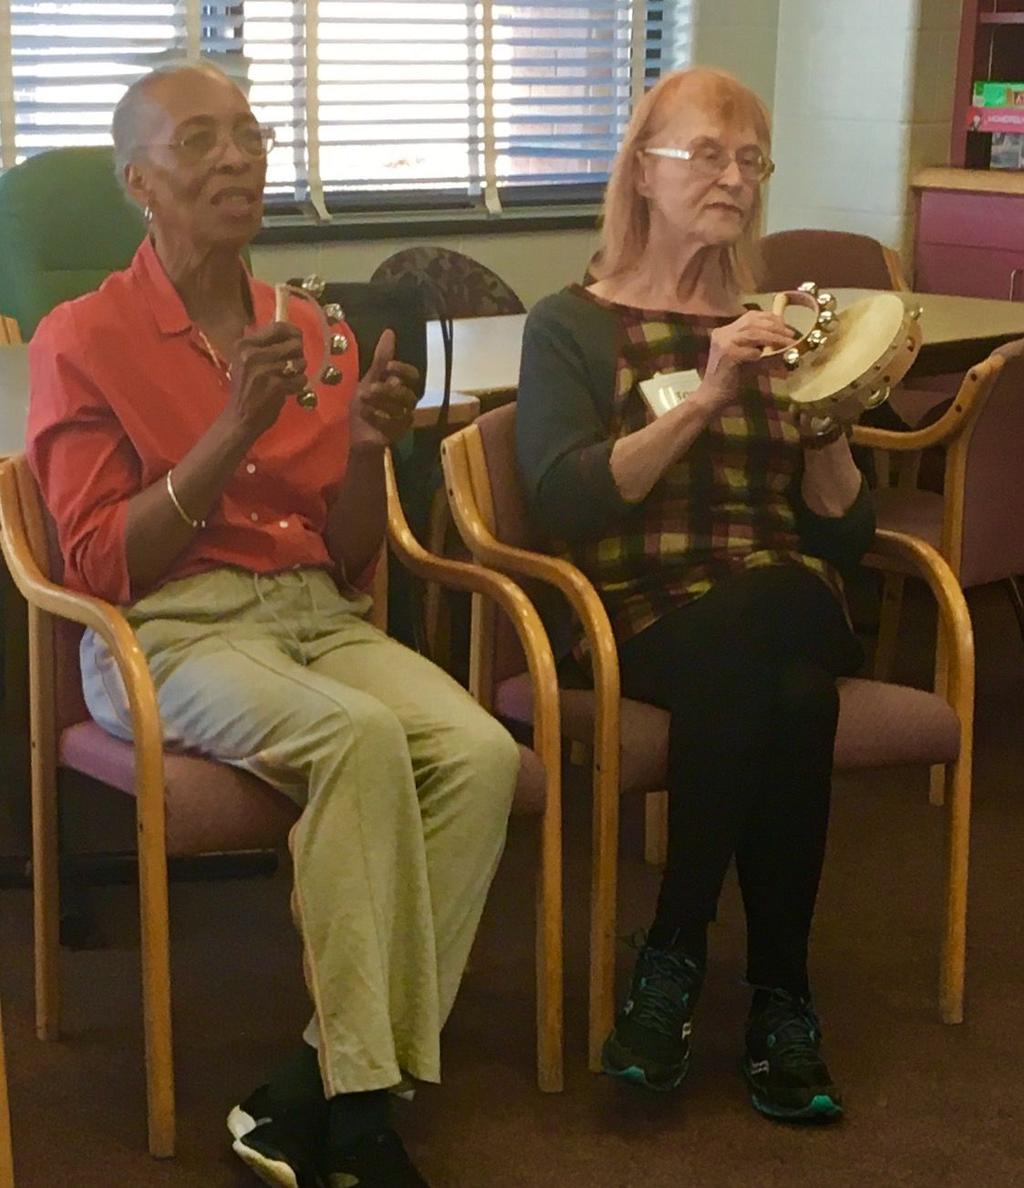 The Kensington Club News Page 3 Meet Diane Eisenhower, Music Therapist A familiar holiday tune for Jeanette and Trin: Feliz Navidad!